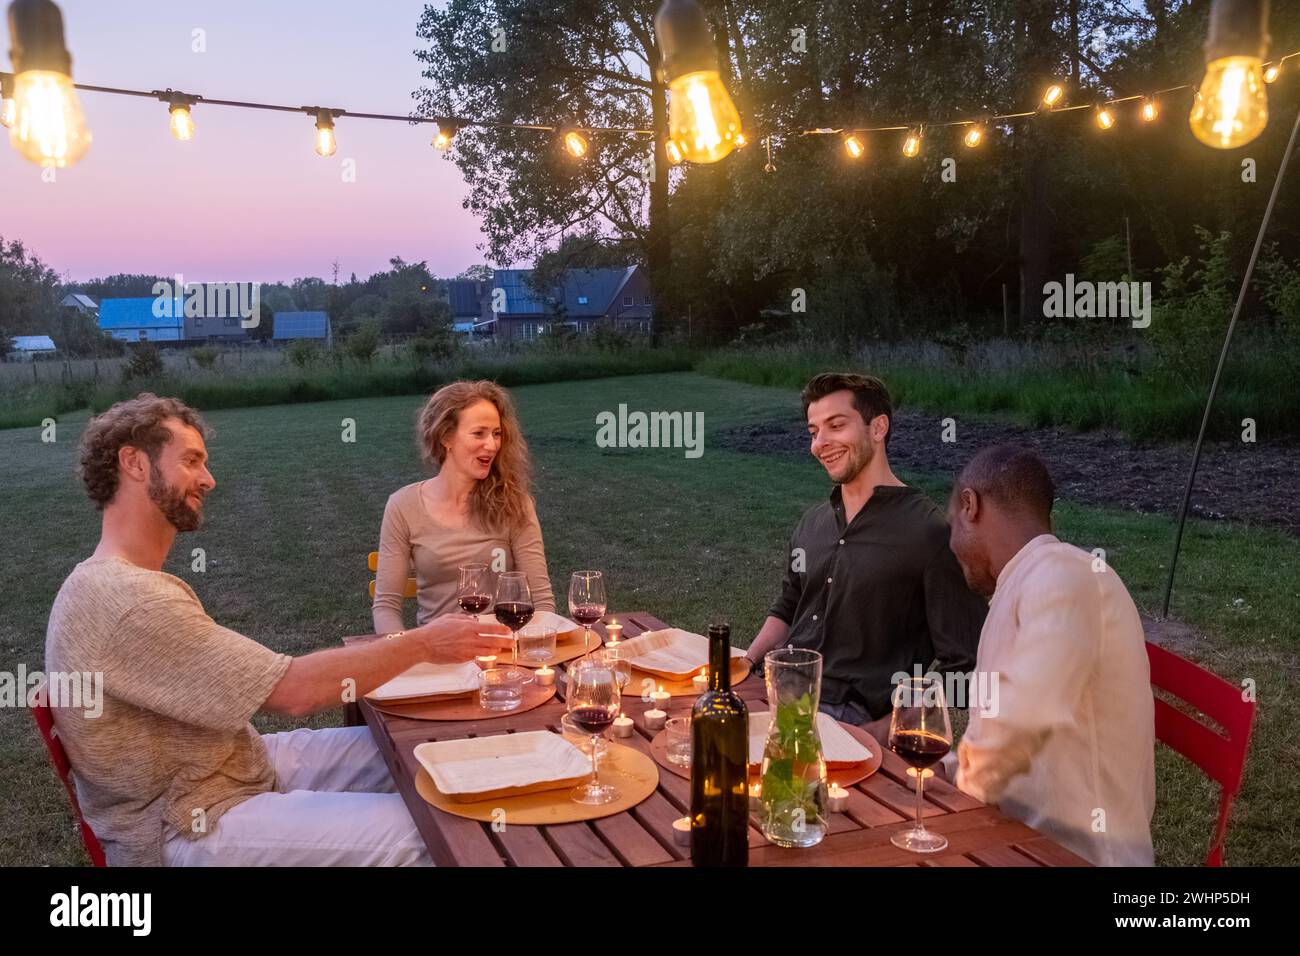 Multiracial group of millenial Friends Gathered at a Barbecue Dinner Table Outside a Beautiful Home with Lights at dusk Decorati Stock Photo